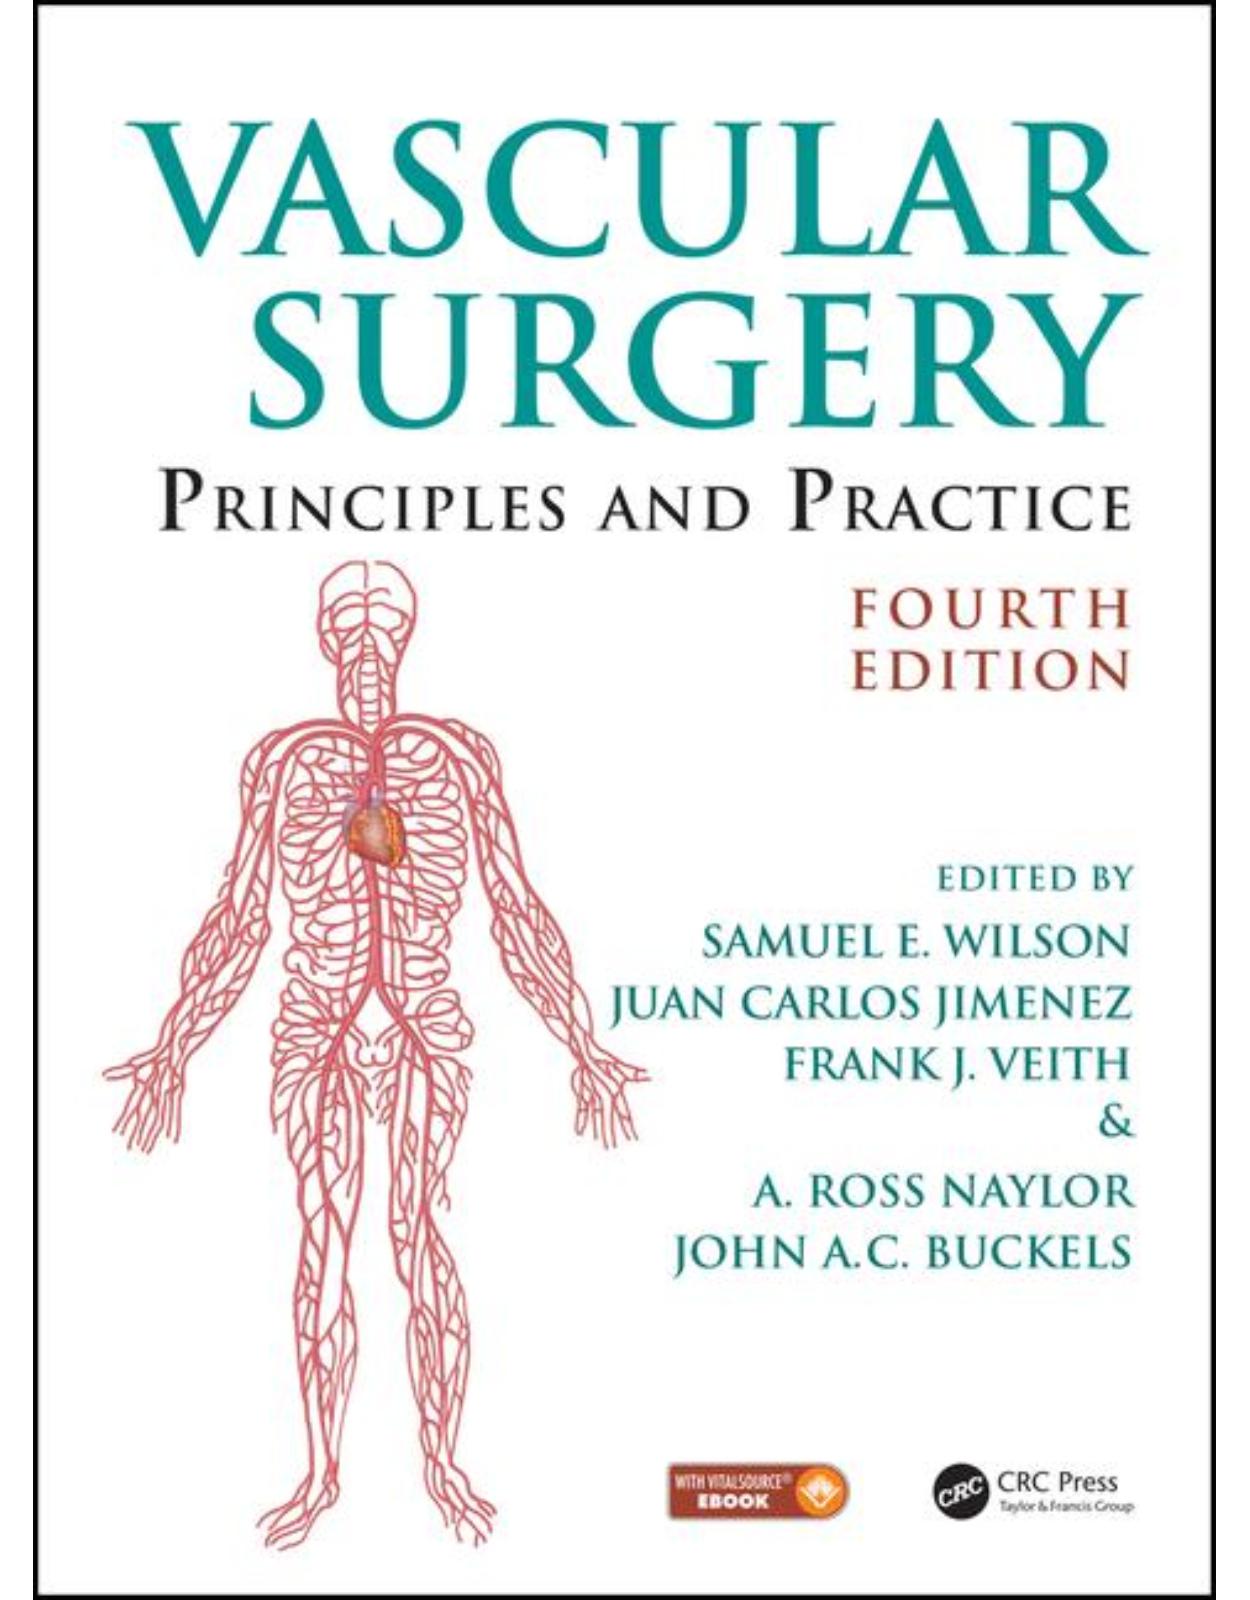 Vascular Surgery: Principles and Practice